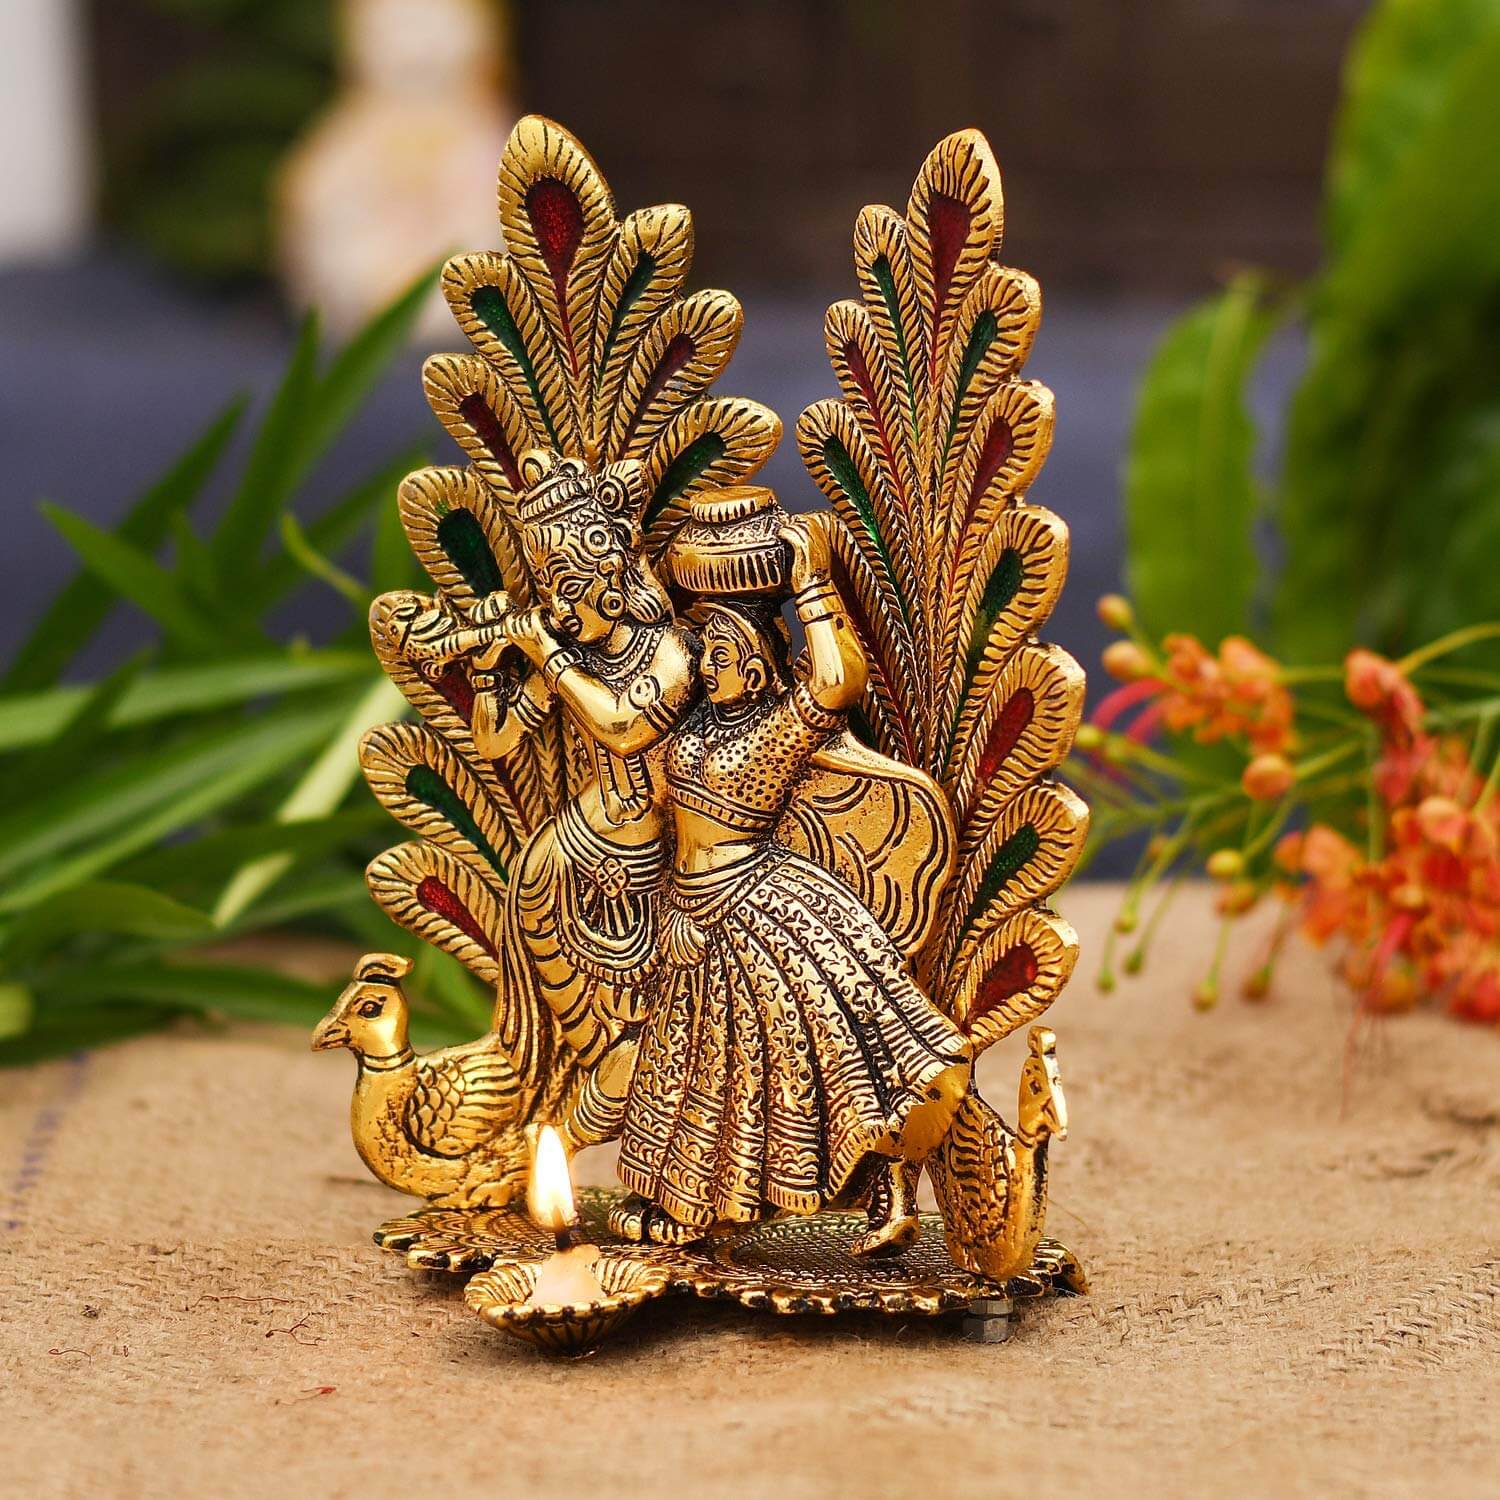 Pack of 1 - Peacock Design Radha Krishna Idol Showpiece with Diya for Puja, Home Decor and Gifting (8 x 6 Inches) Mangal Fashions | Indian Home Decor and Craft